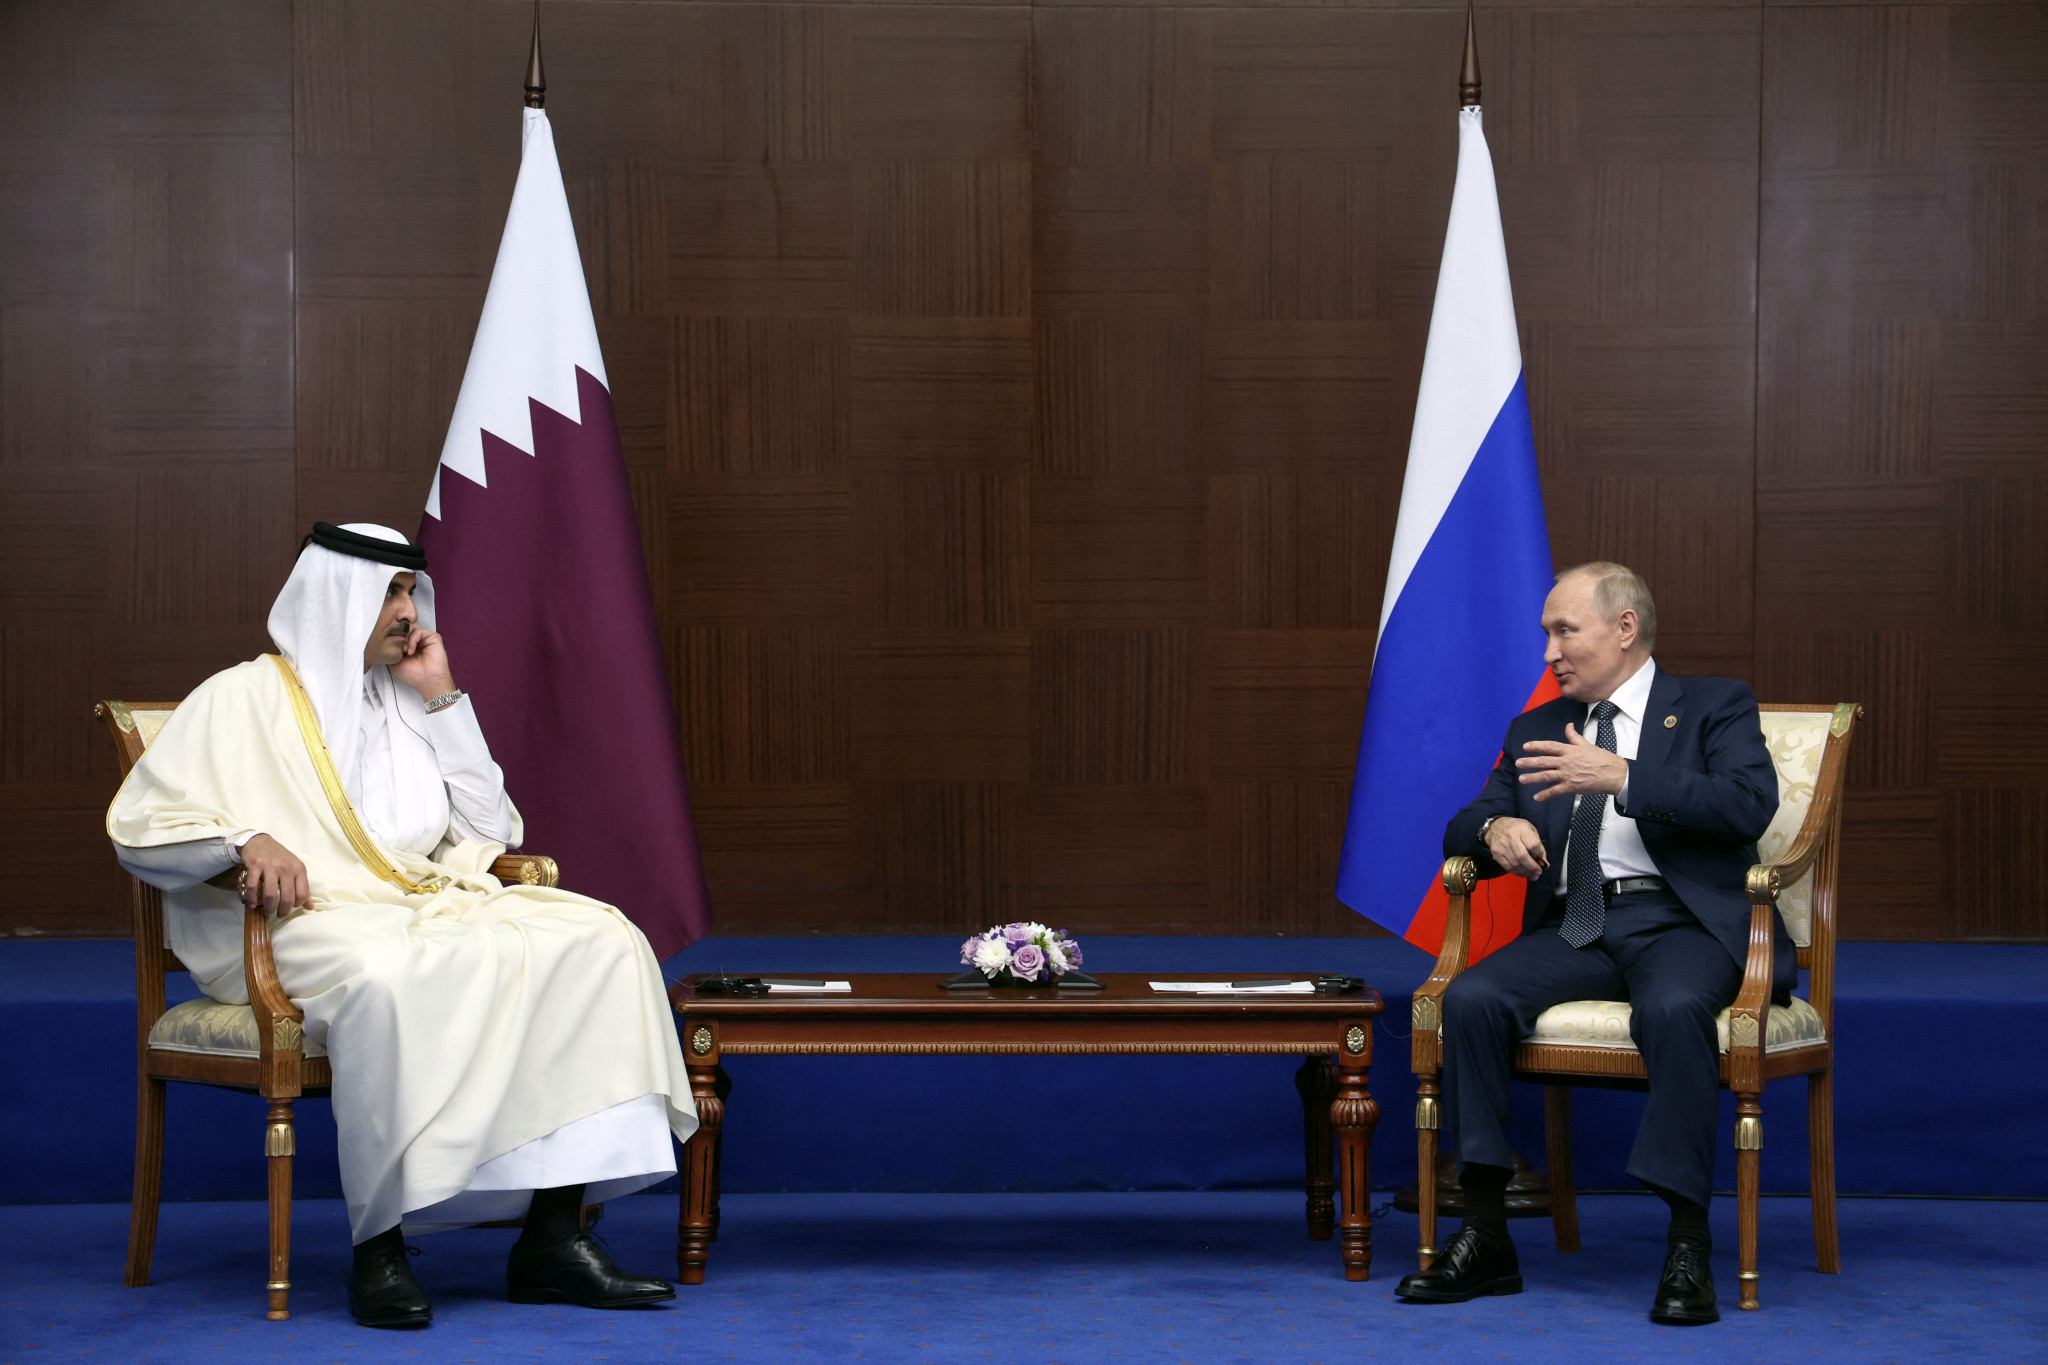 Qatari Emir Sheikh Tamim bin Hamad al-Thani, left, said in Astana "Russian friends have provided great support to Qatar" in its World Cup preparations ©Getty Images